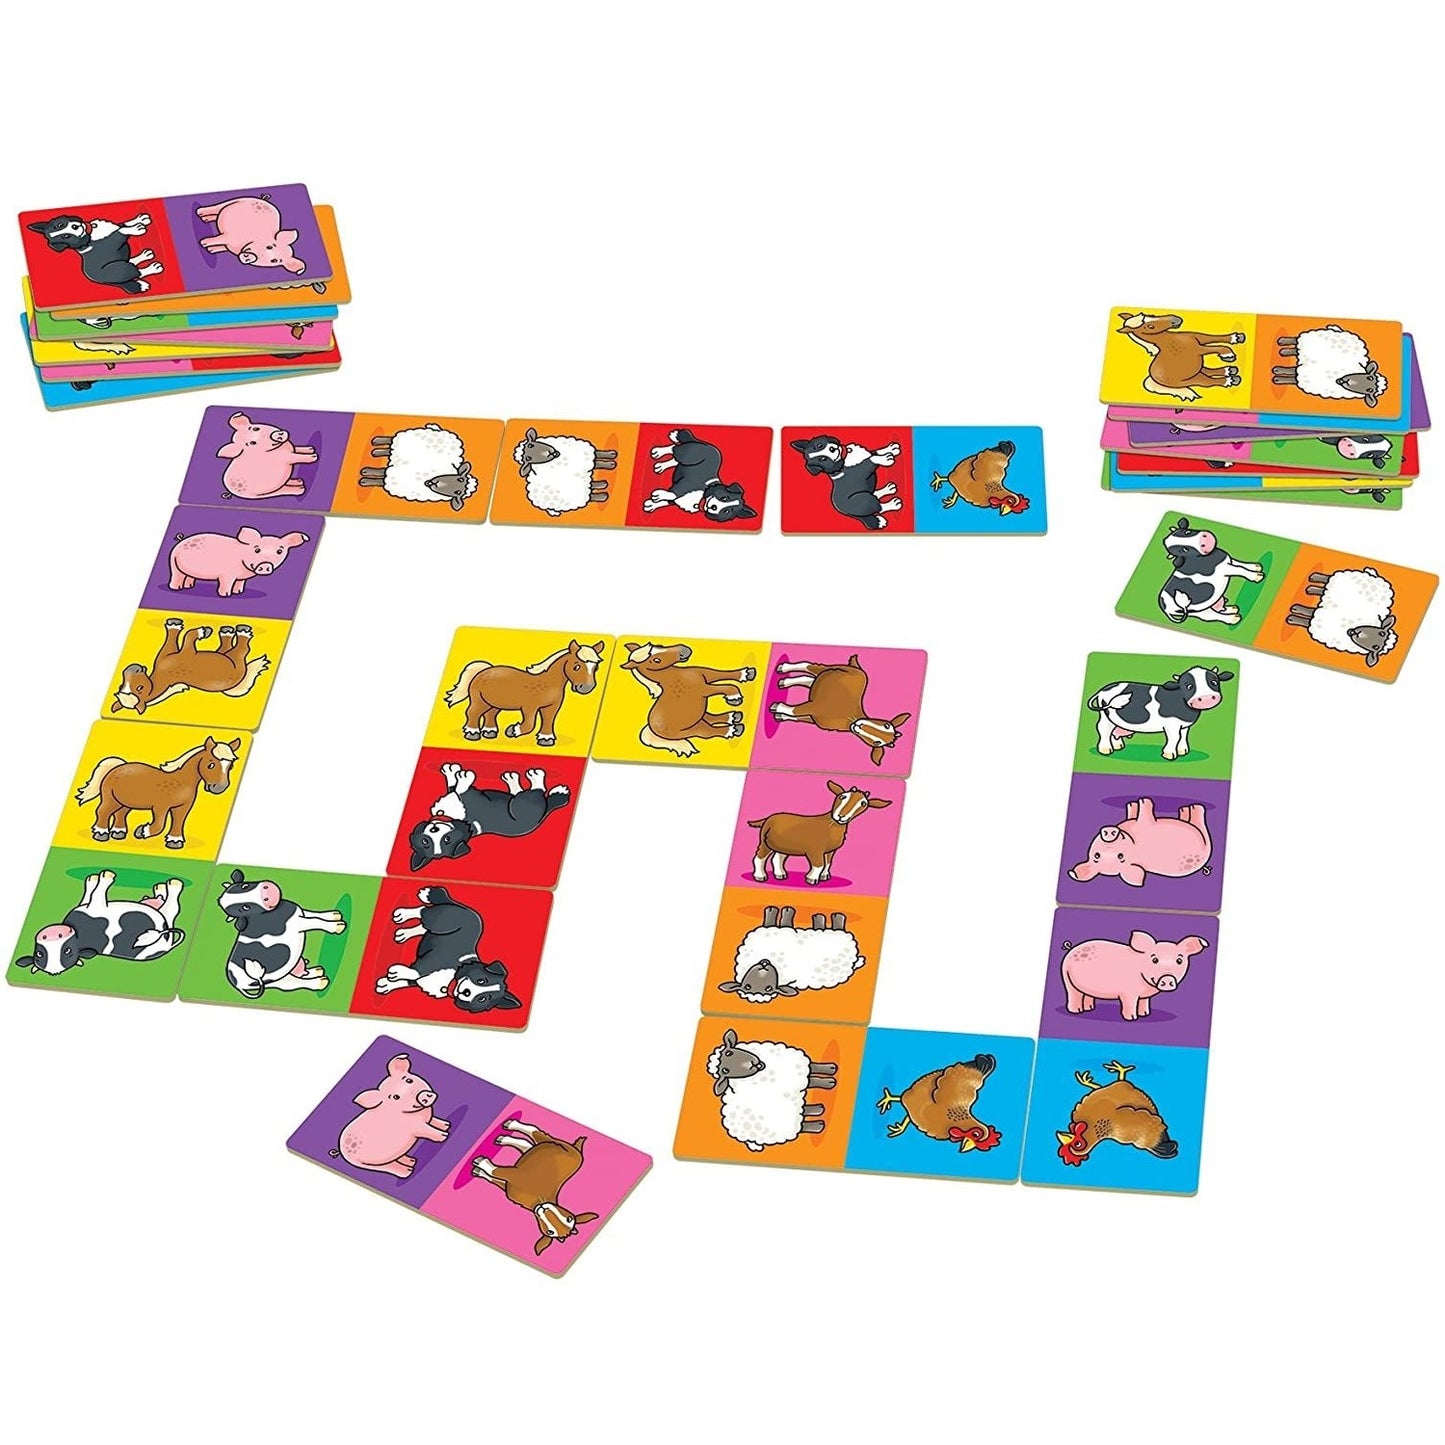 Orchard Toys Farmyard Dominoes 農莊對對碰